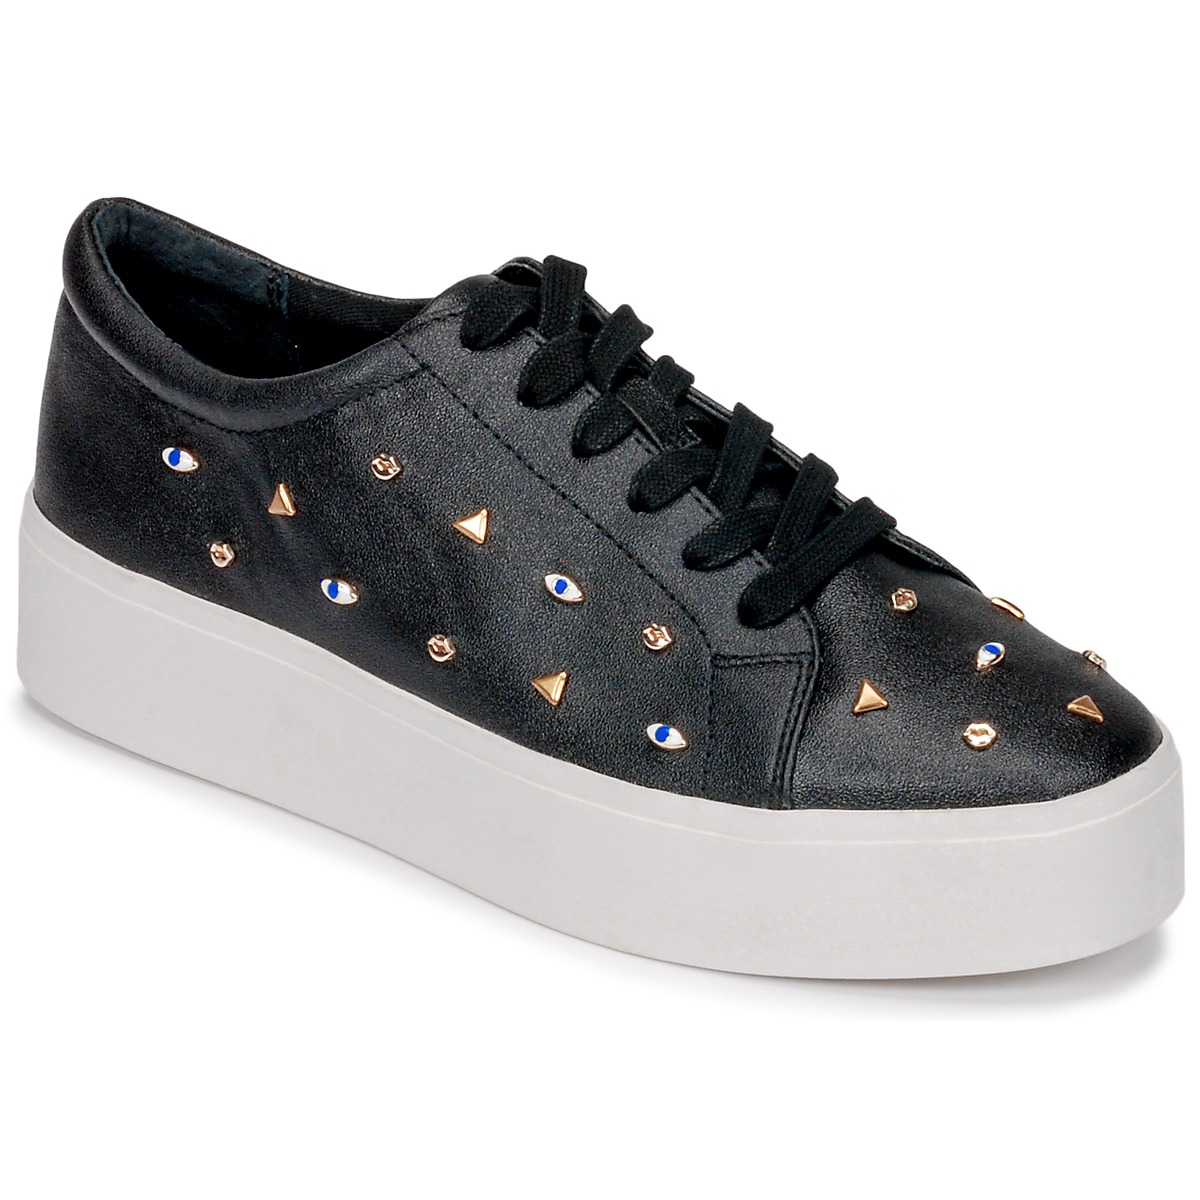 Shoes Women Low top trainers Katy Perry THE DYLAN Black